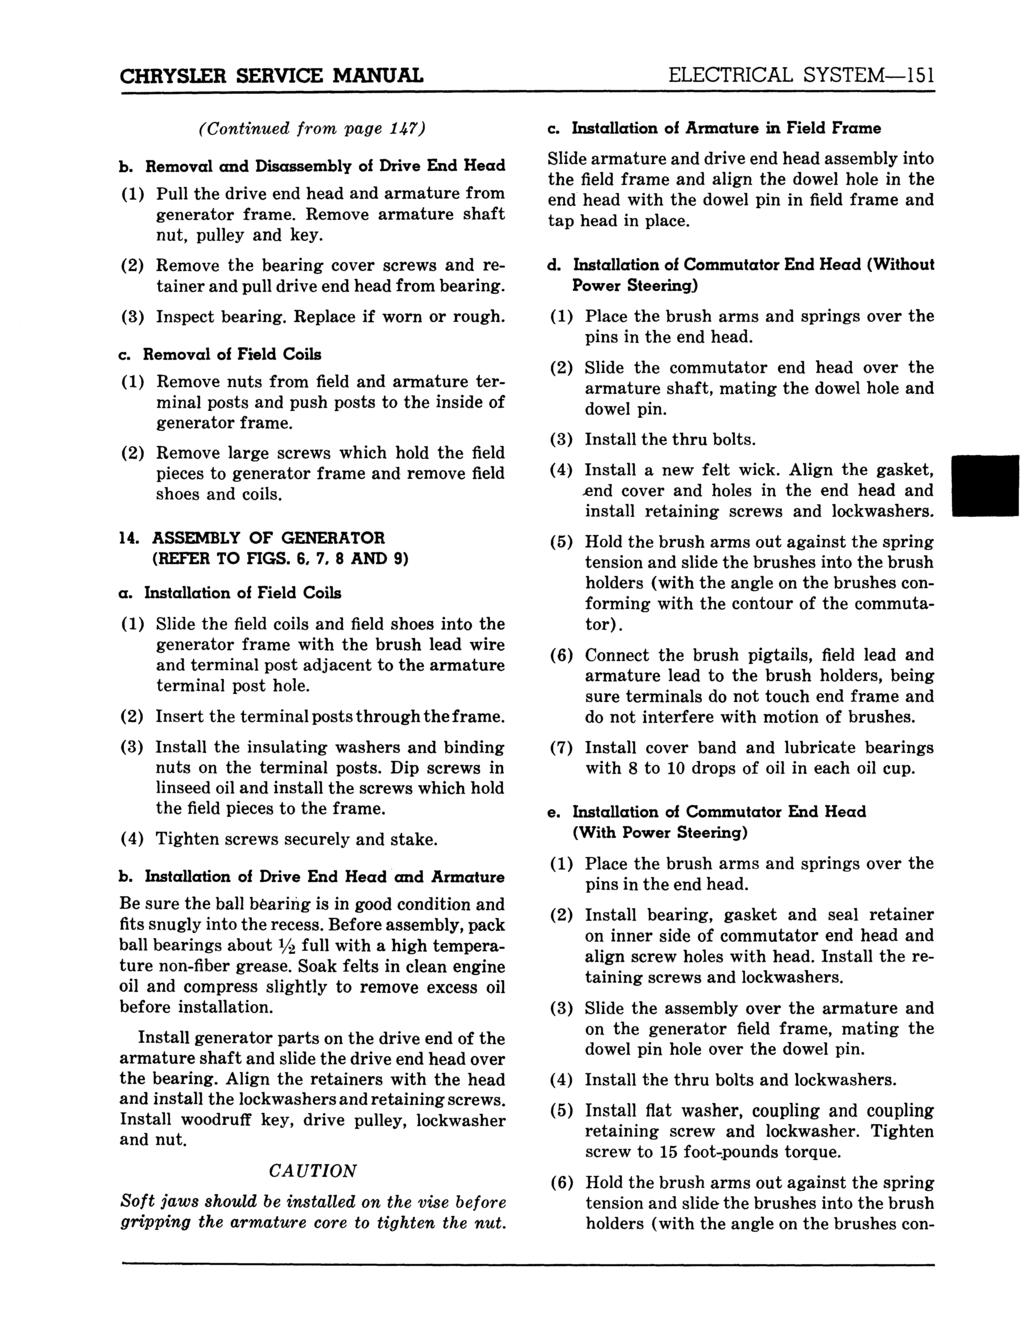 CHRYSLER SERVICE MANUAL (Continued from page 1U7) b. Removal and Disassembly of Drive End Head (1) Pull the drive end head and armature from generator frame. Remove armature shaft nut, pulley and key.